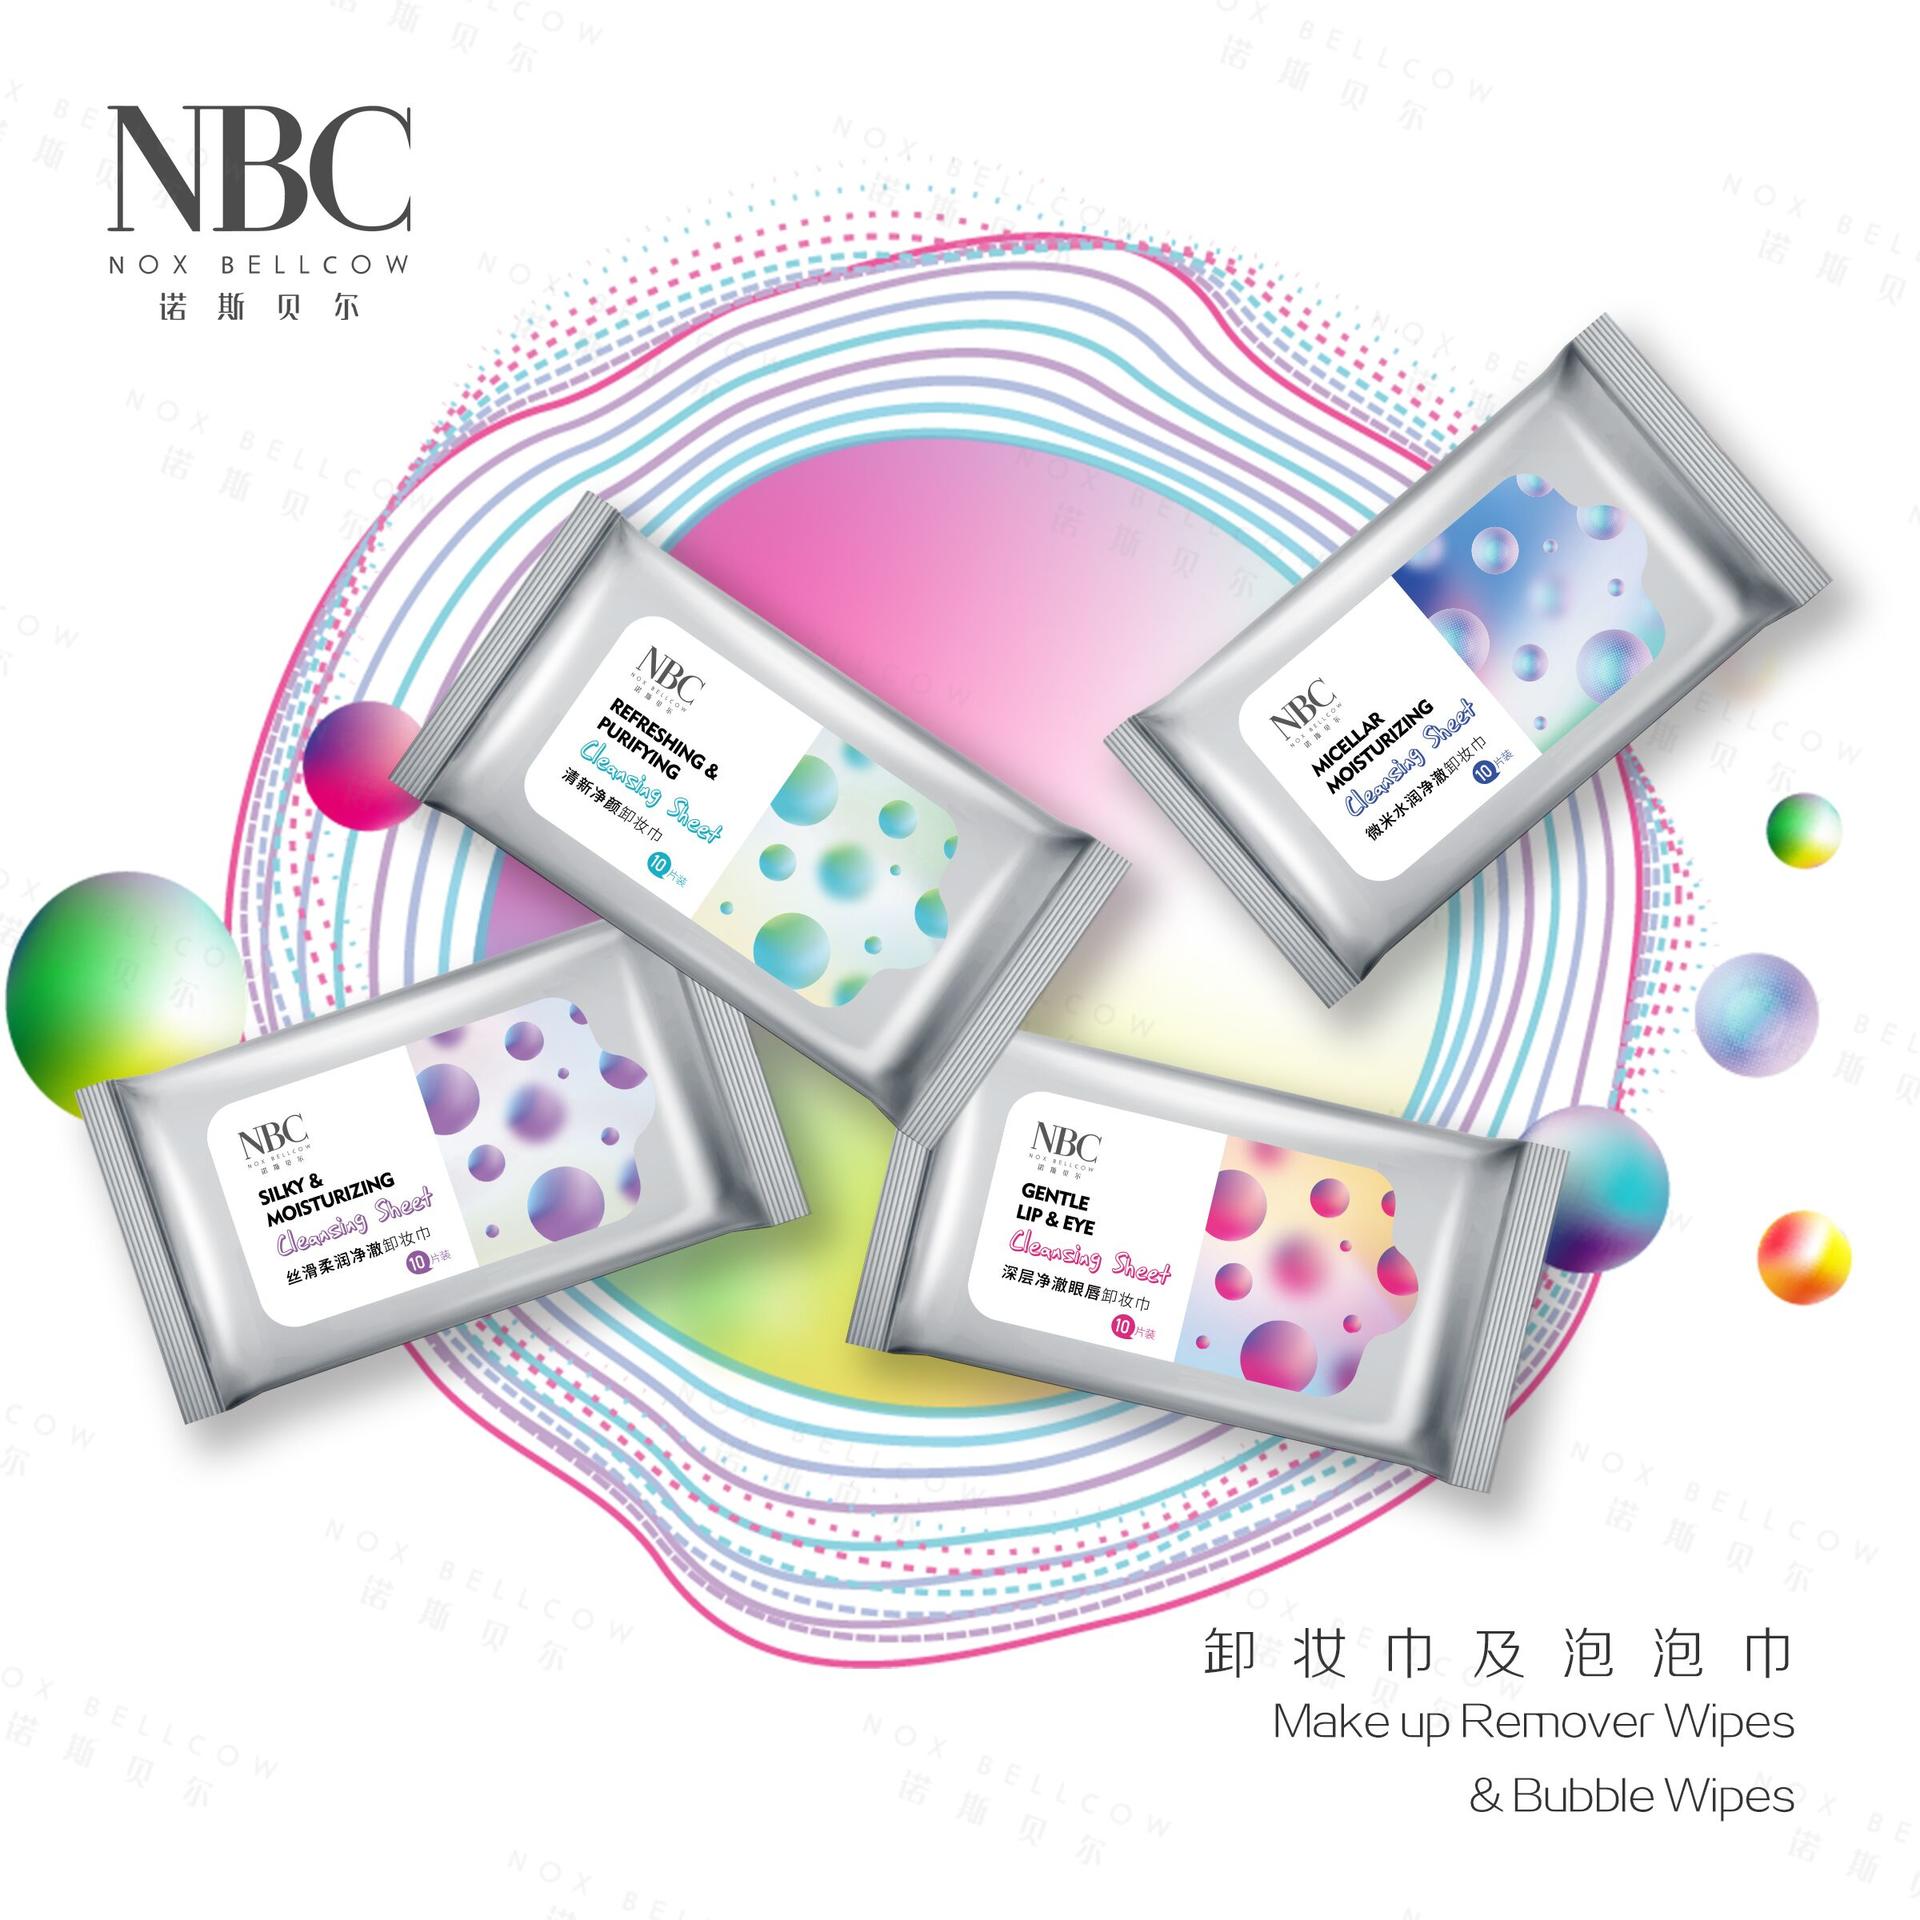 New NBC Cleansing Tissue